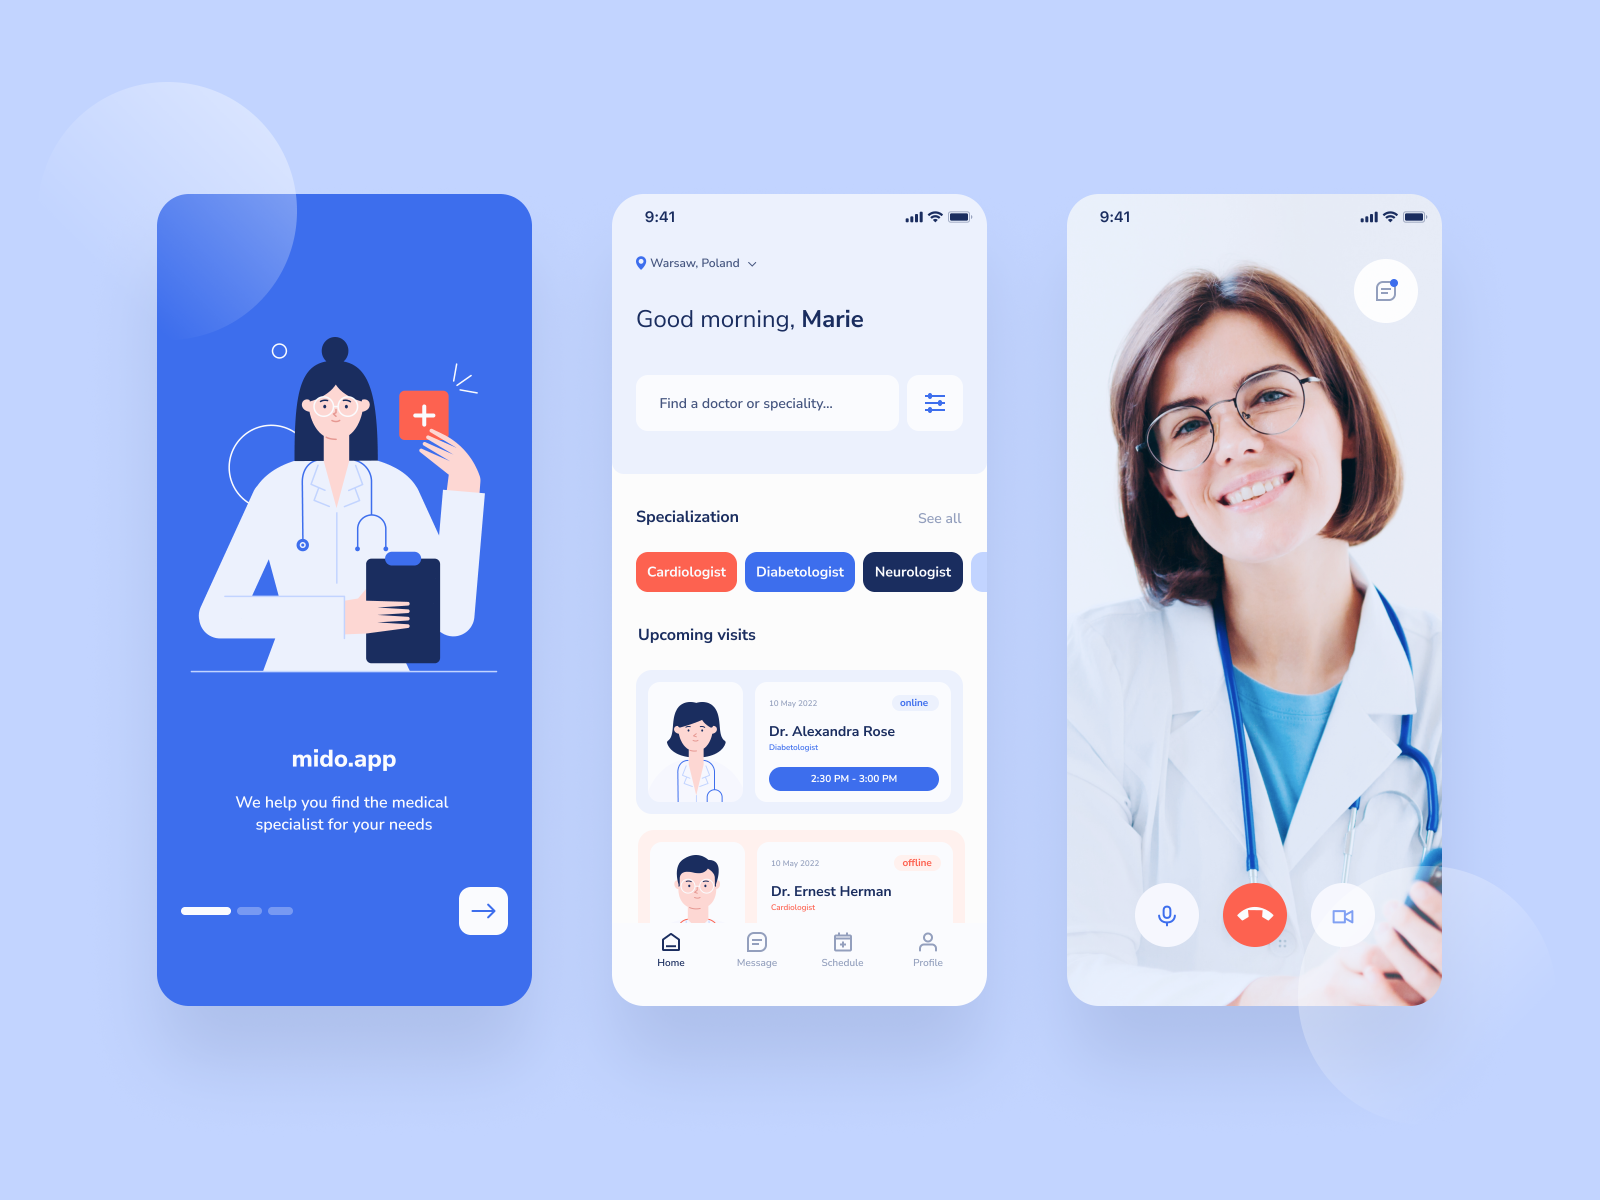 MIDO - an app for patient-doctor communication